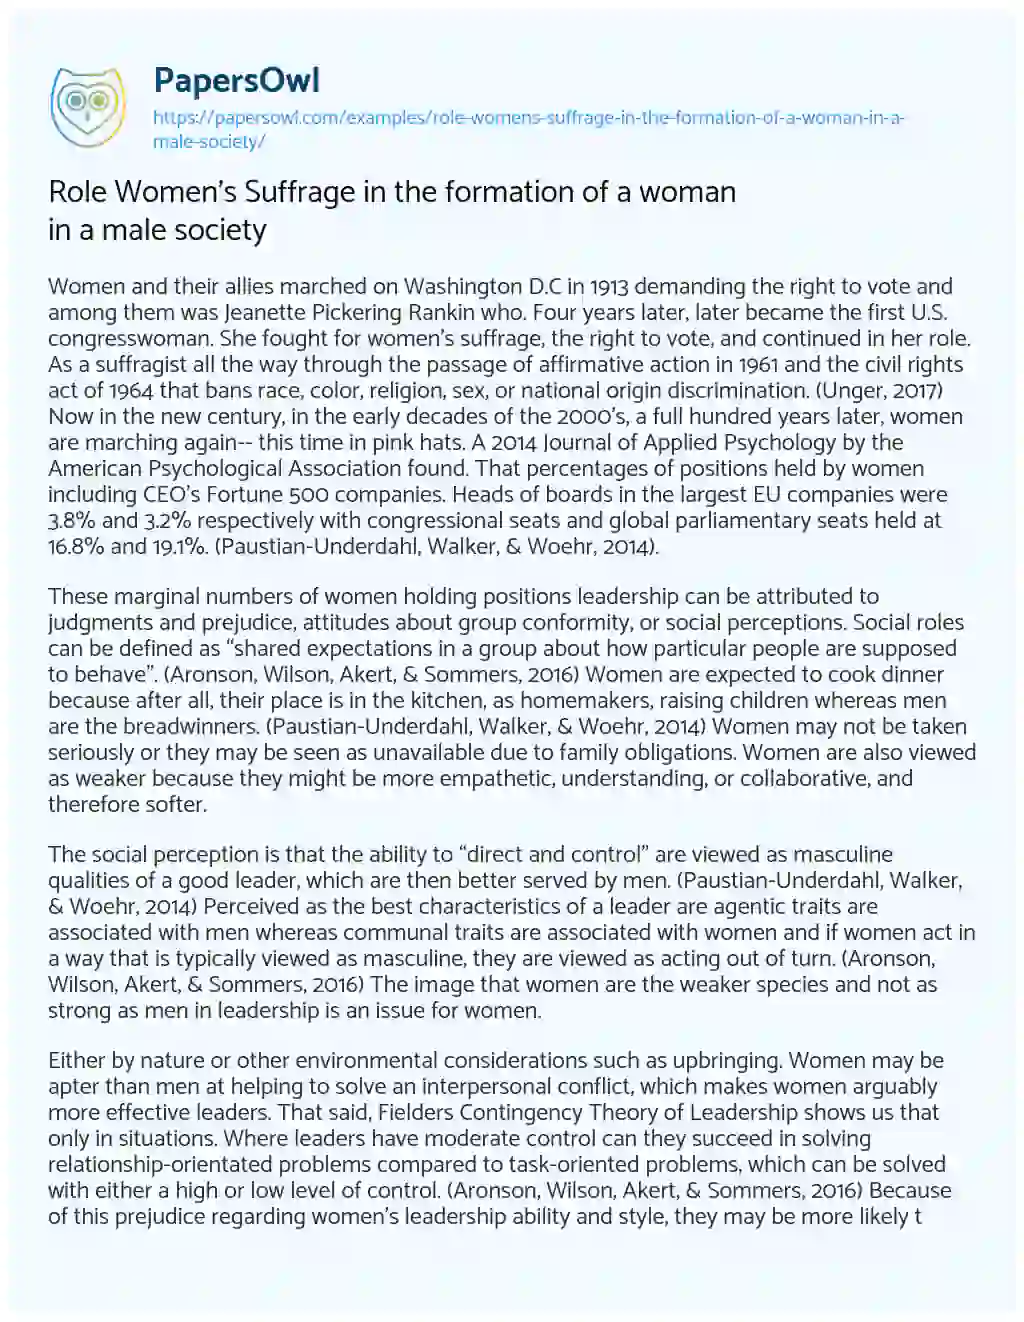 Essay on Role Women’s Suffrage in the Formation of a Woman in a Male Society